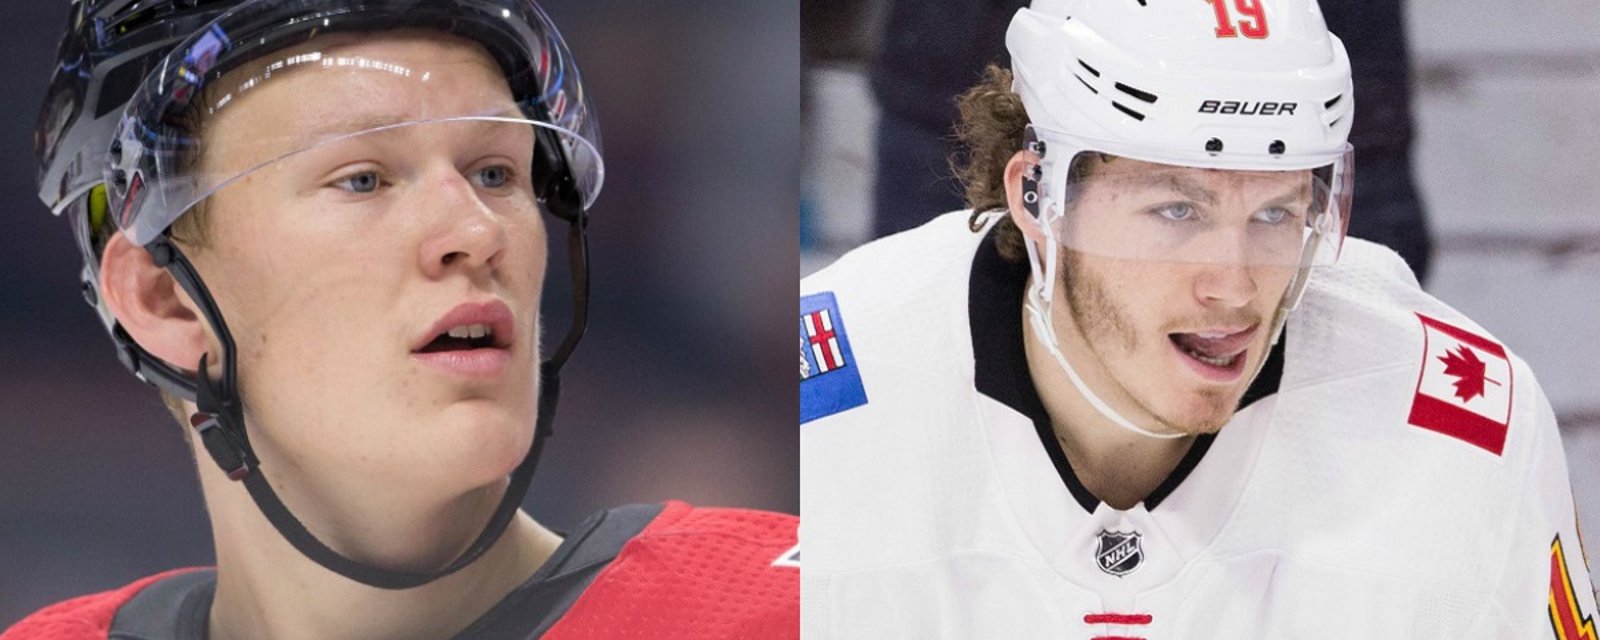 Keith Tkachuk lays down the law ahead of match up between Brady and Matthew Tkachuk.